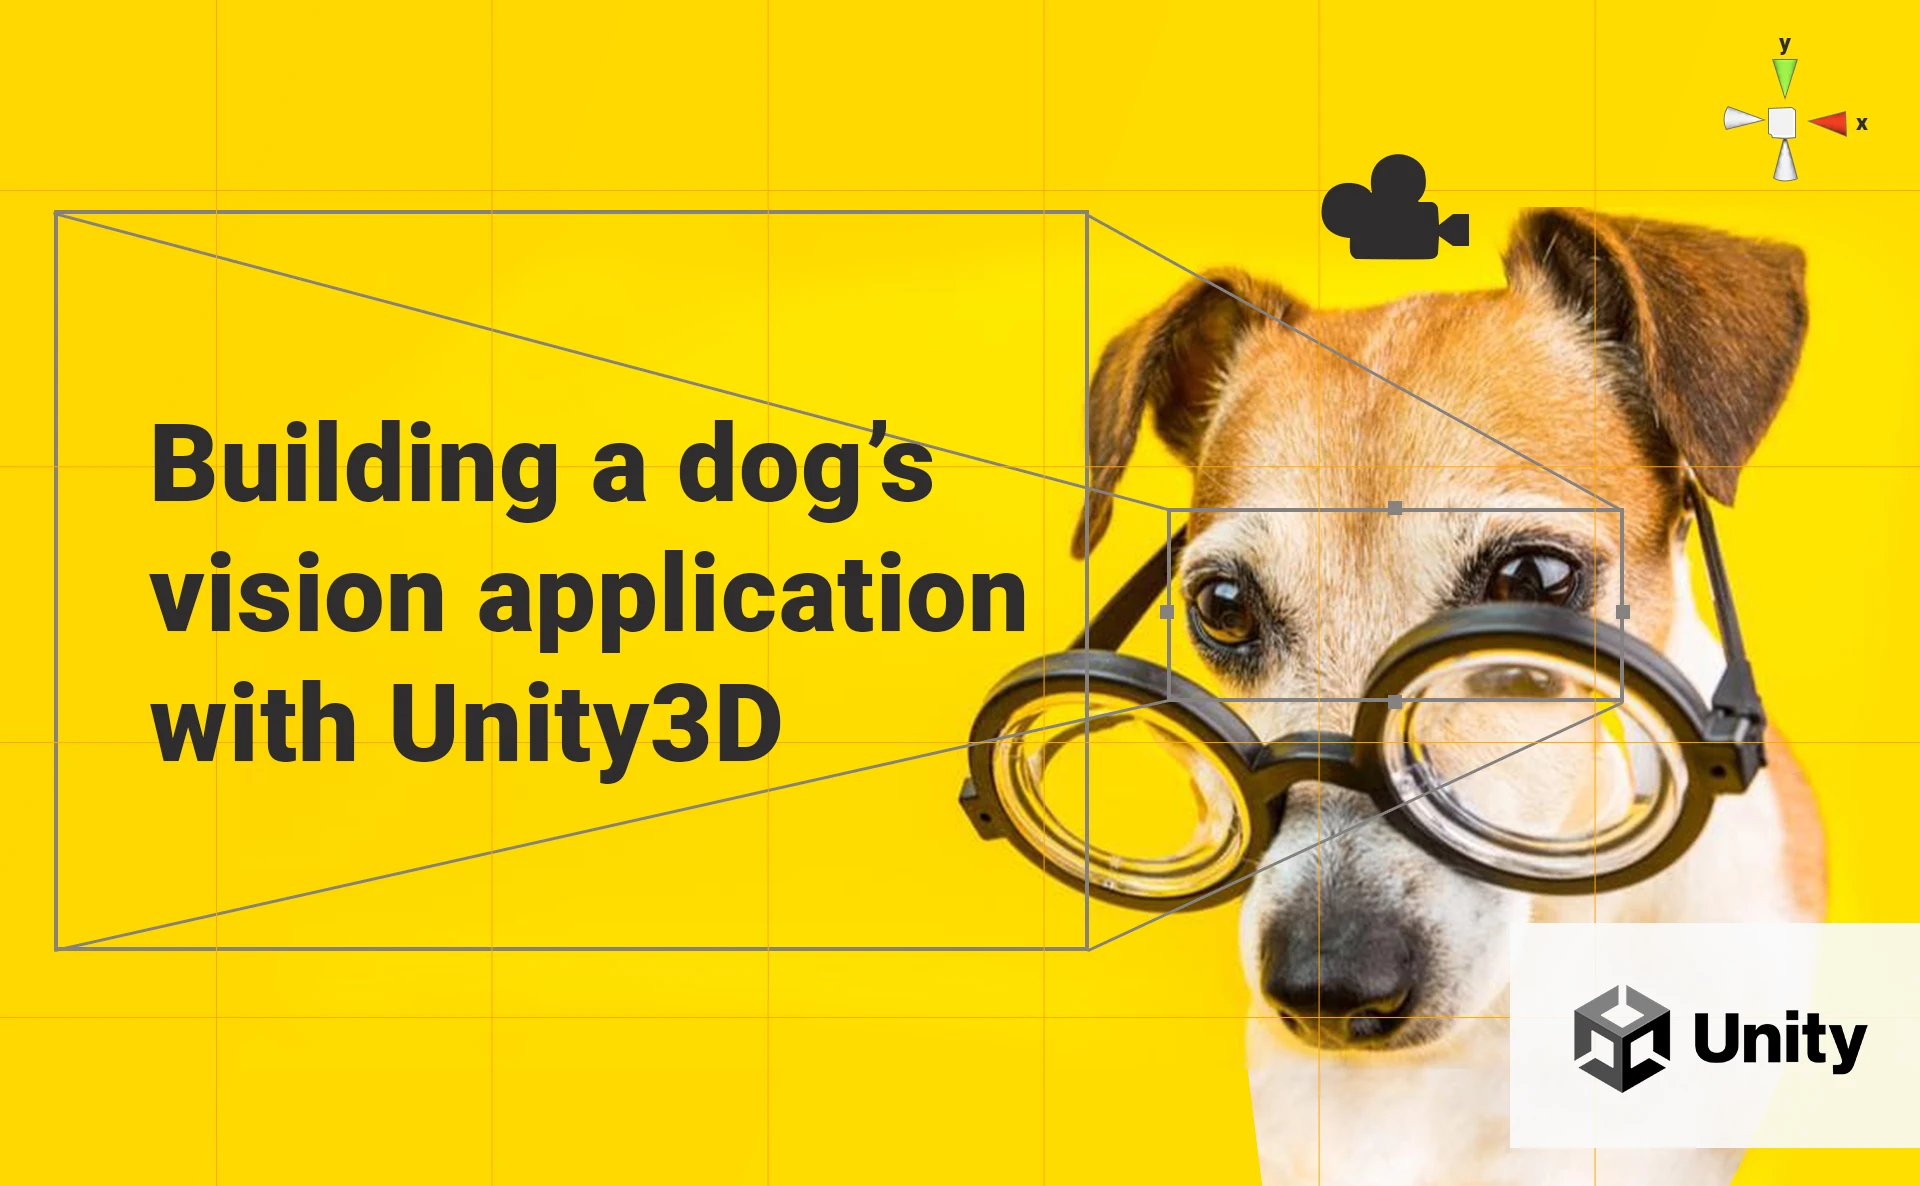 Building a dog’s vision application with Unity3D